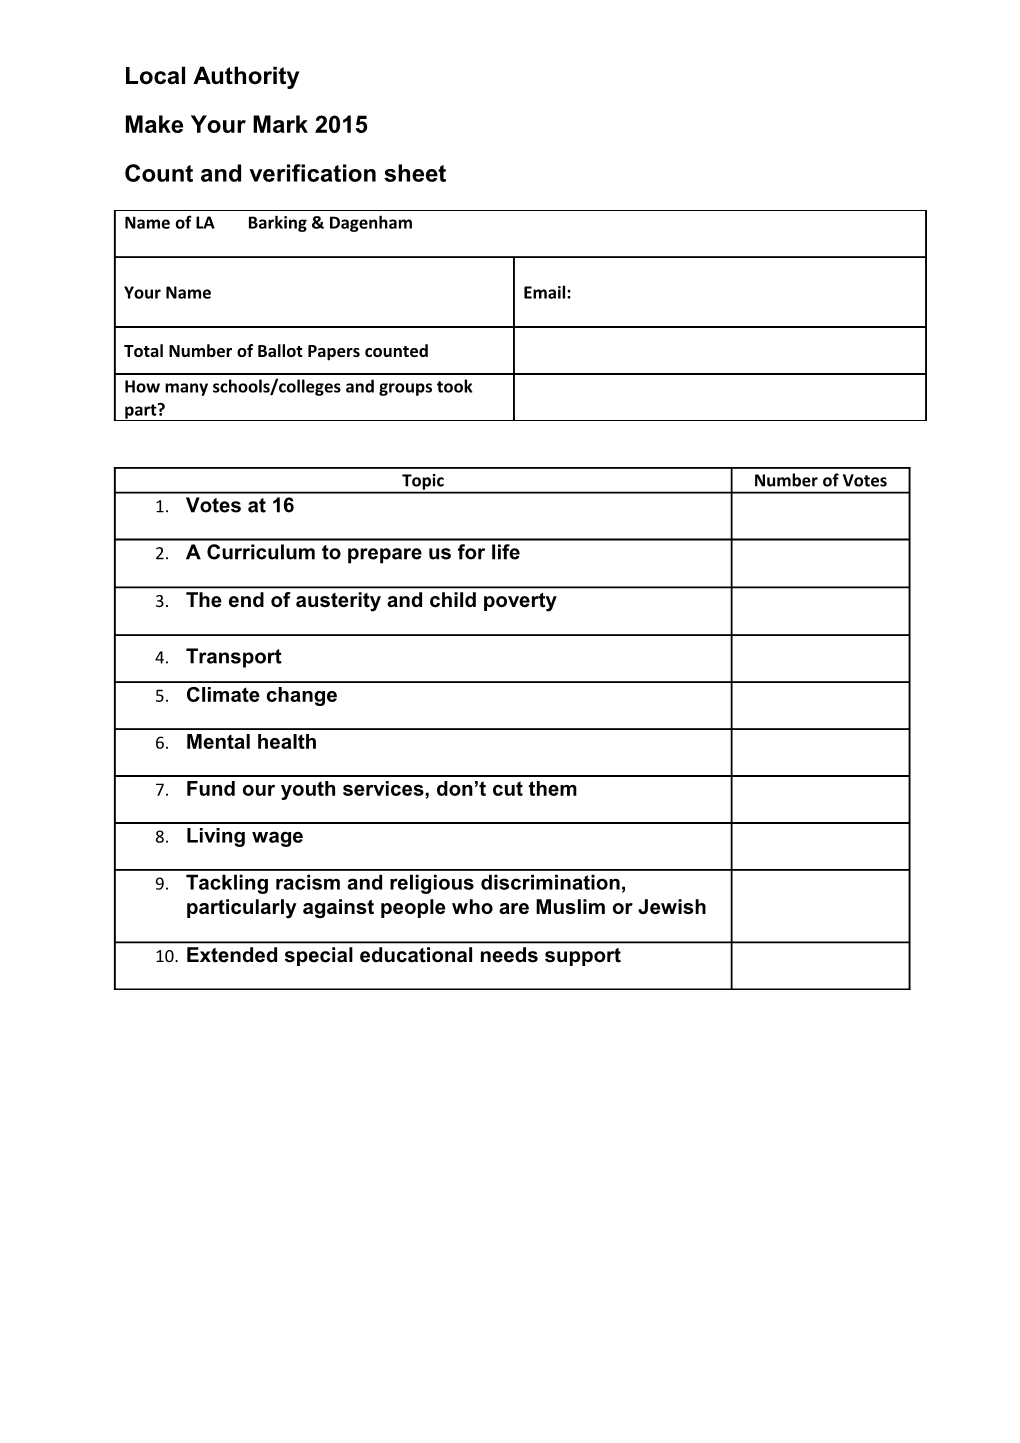 Count and Verification Sheet s7